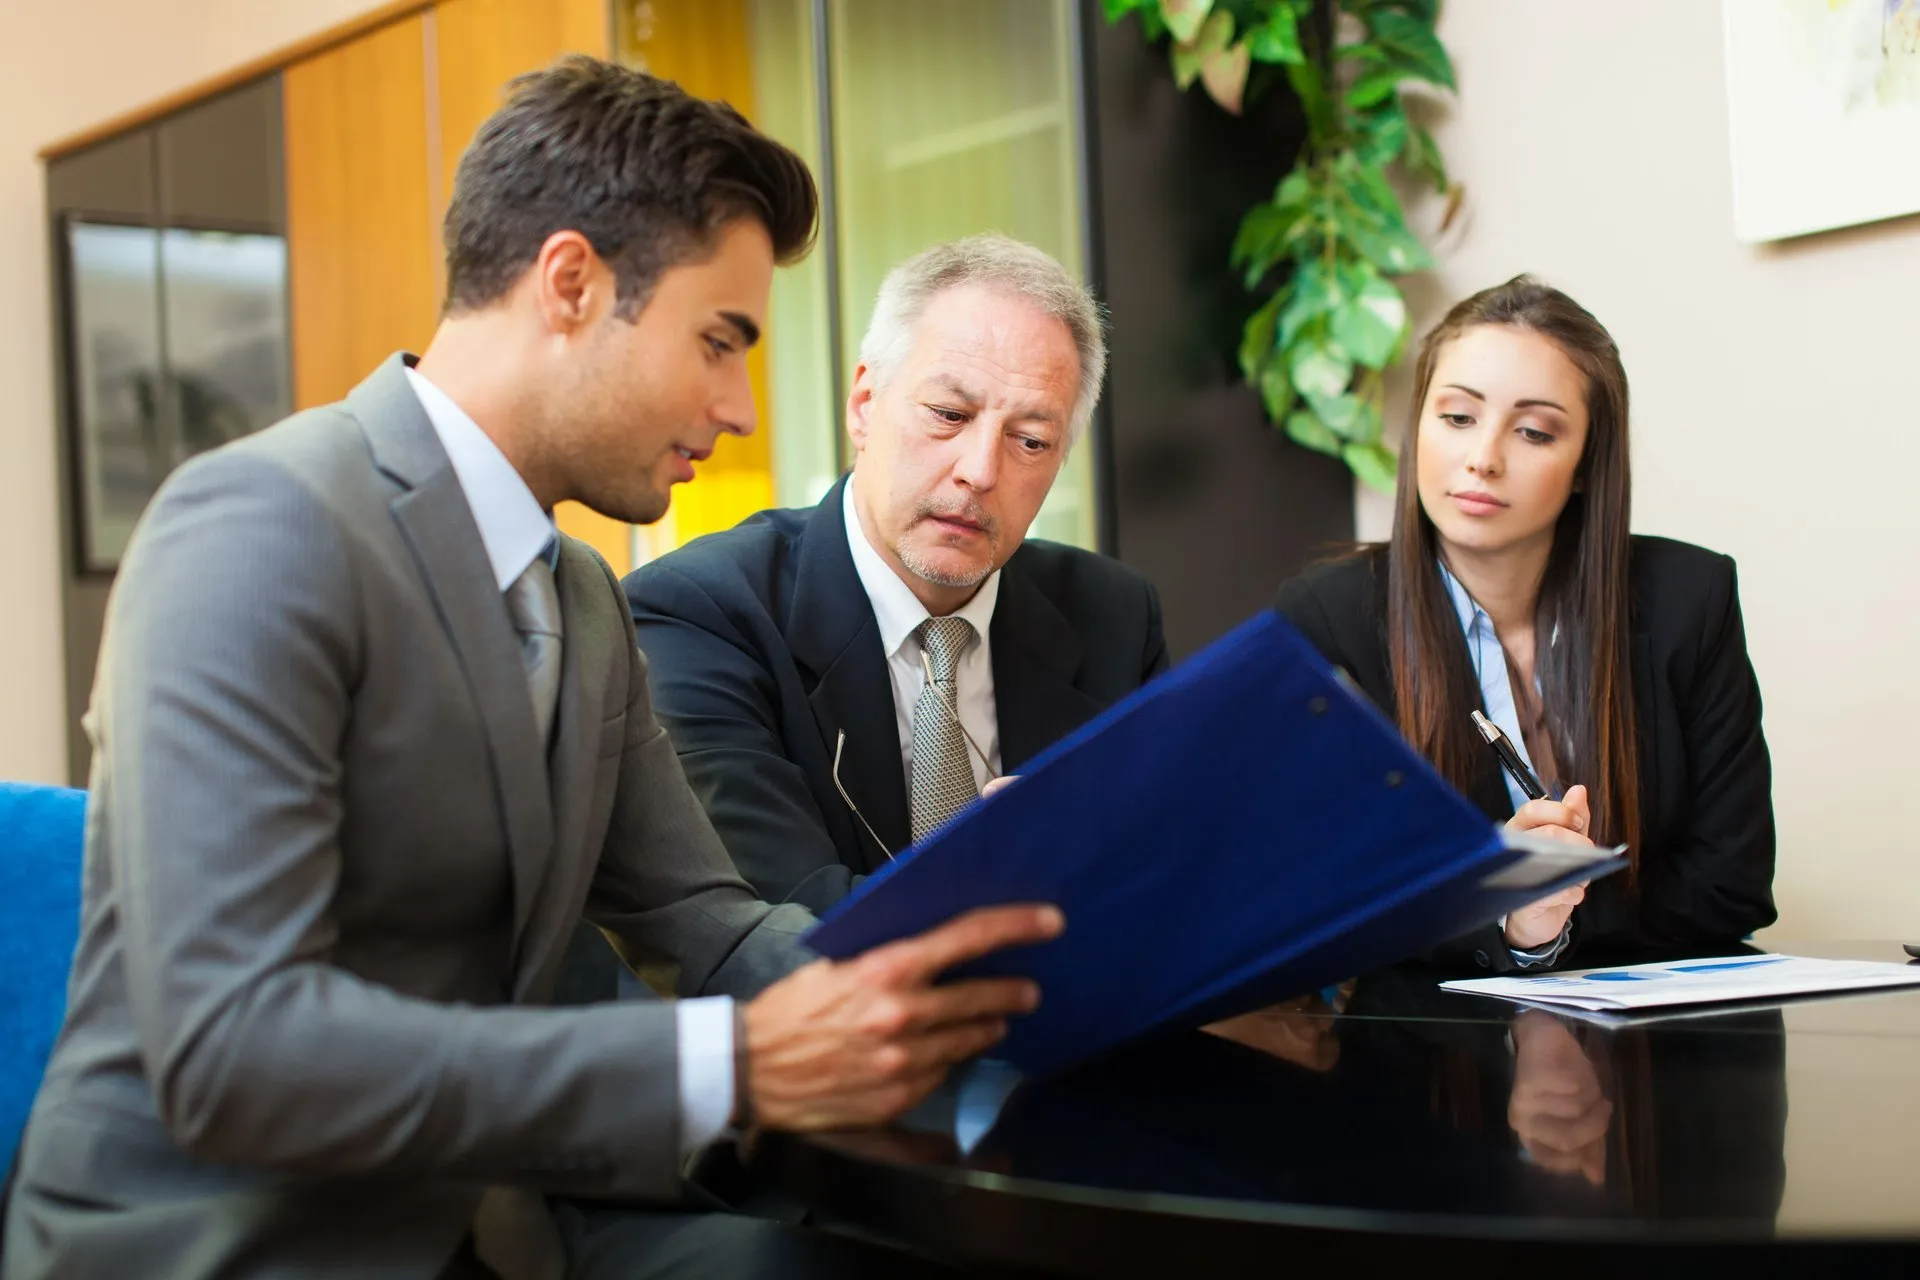 Business contract counseling and review